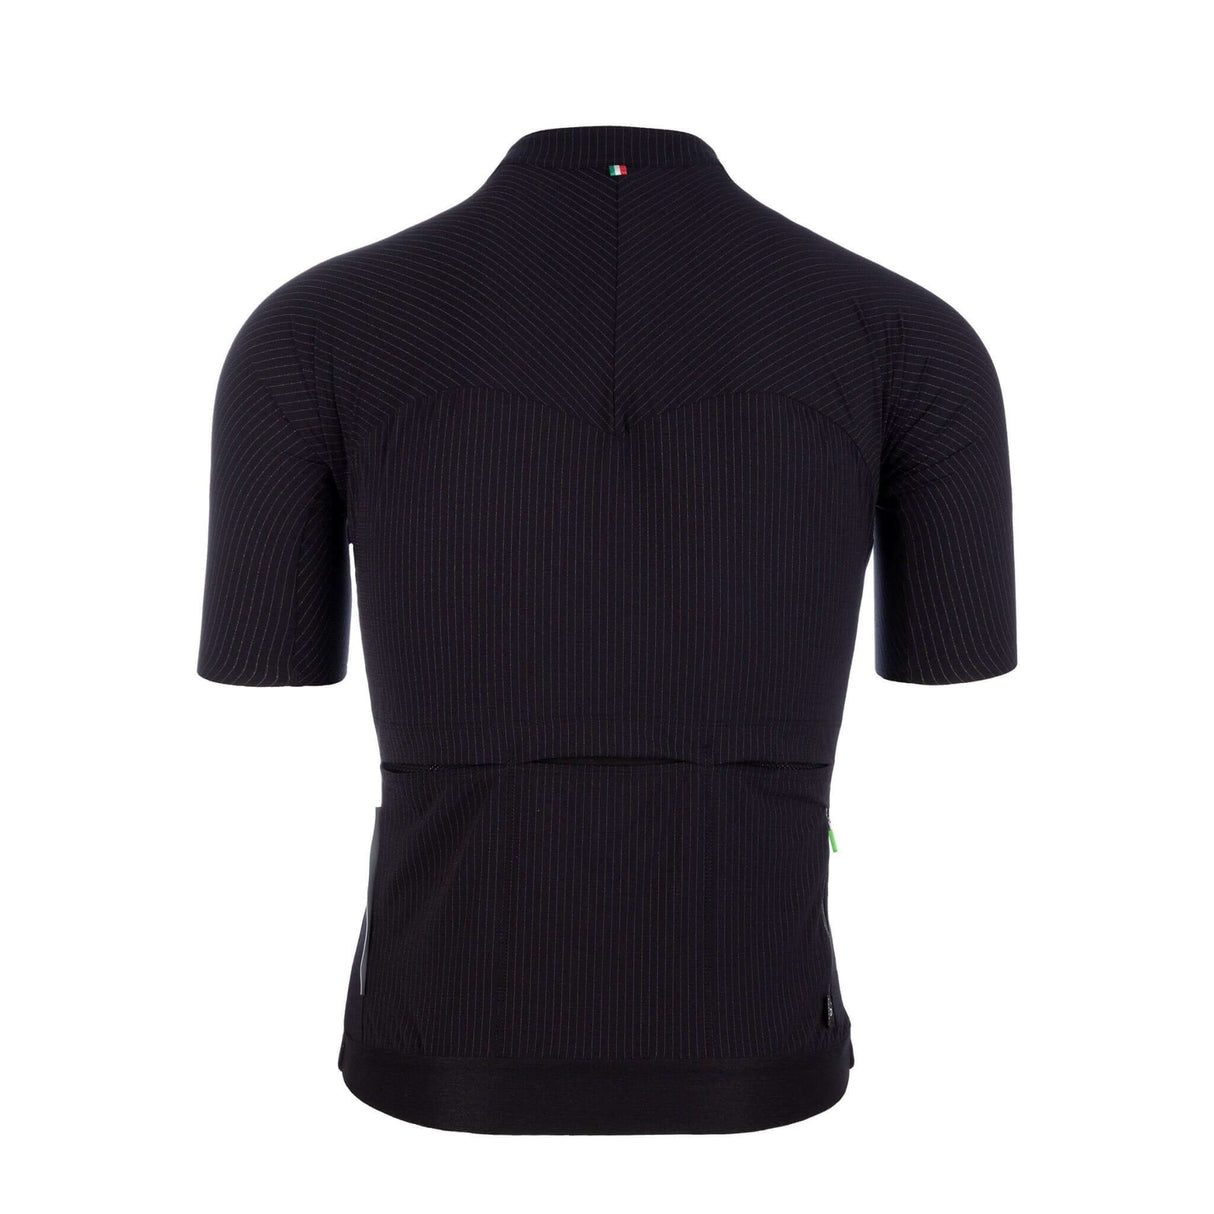 L1 Pinstripe X Short Sleeve Jersey - Strictly Bicycles